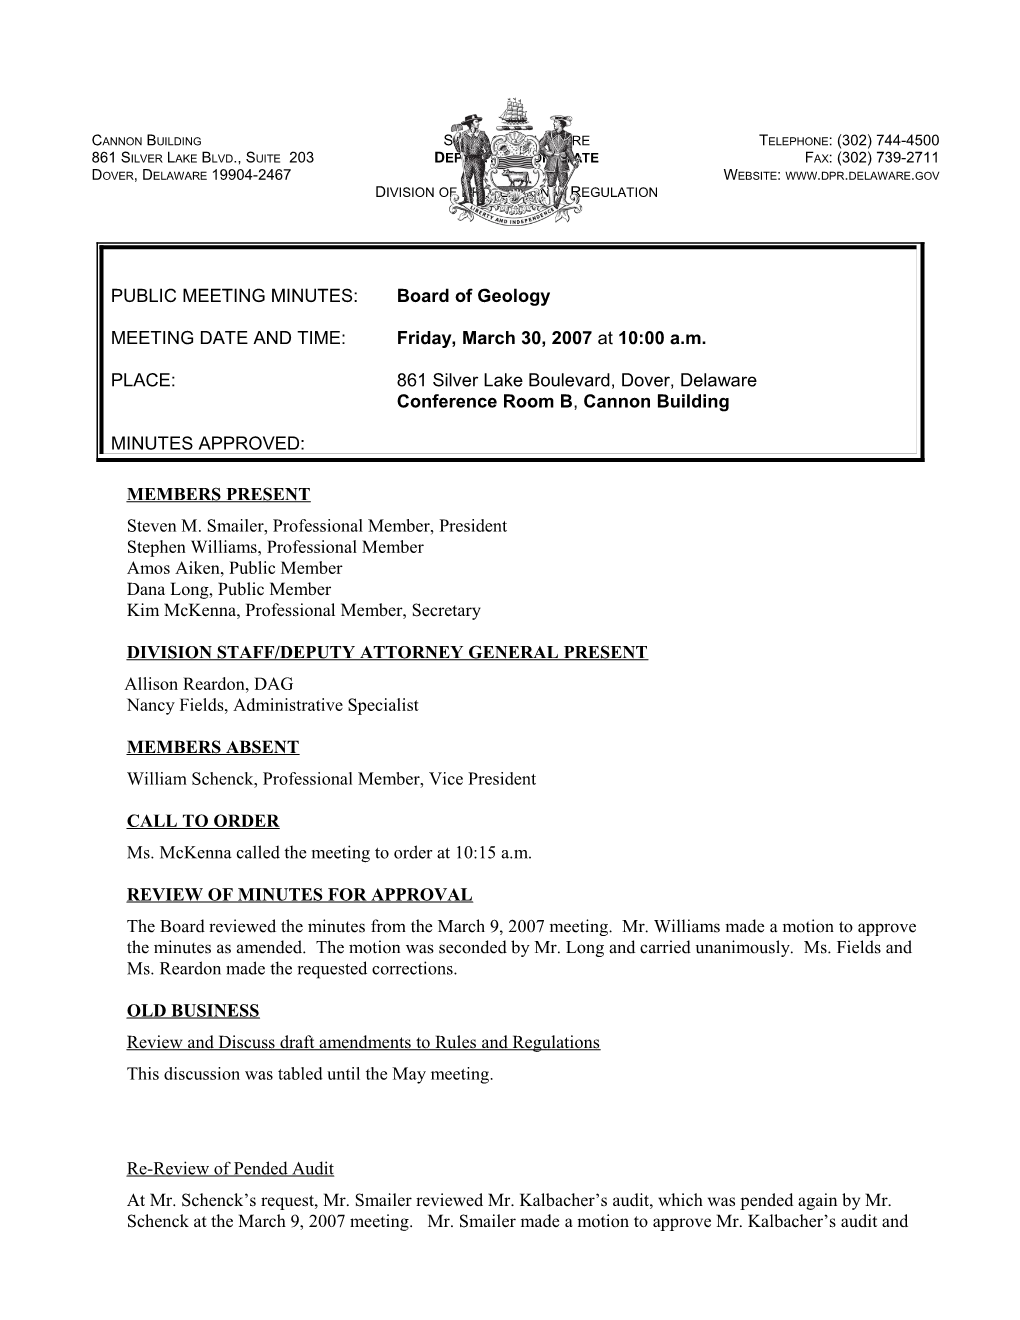 PUBLIC MEETING MINUTES: Board of Geology